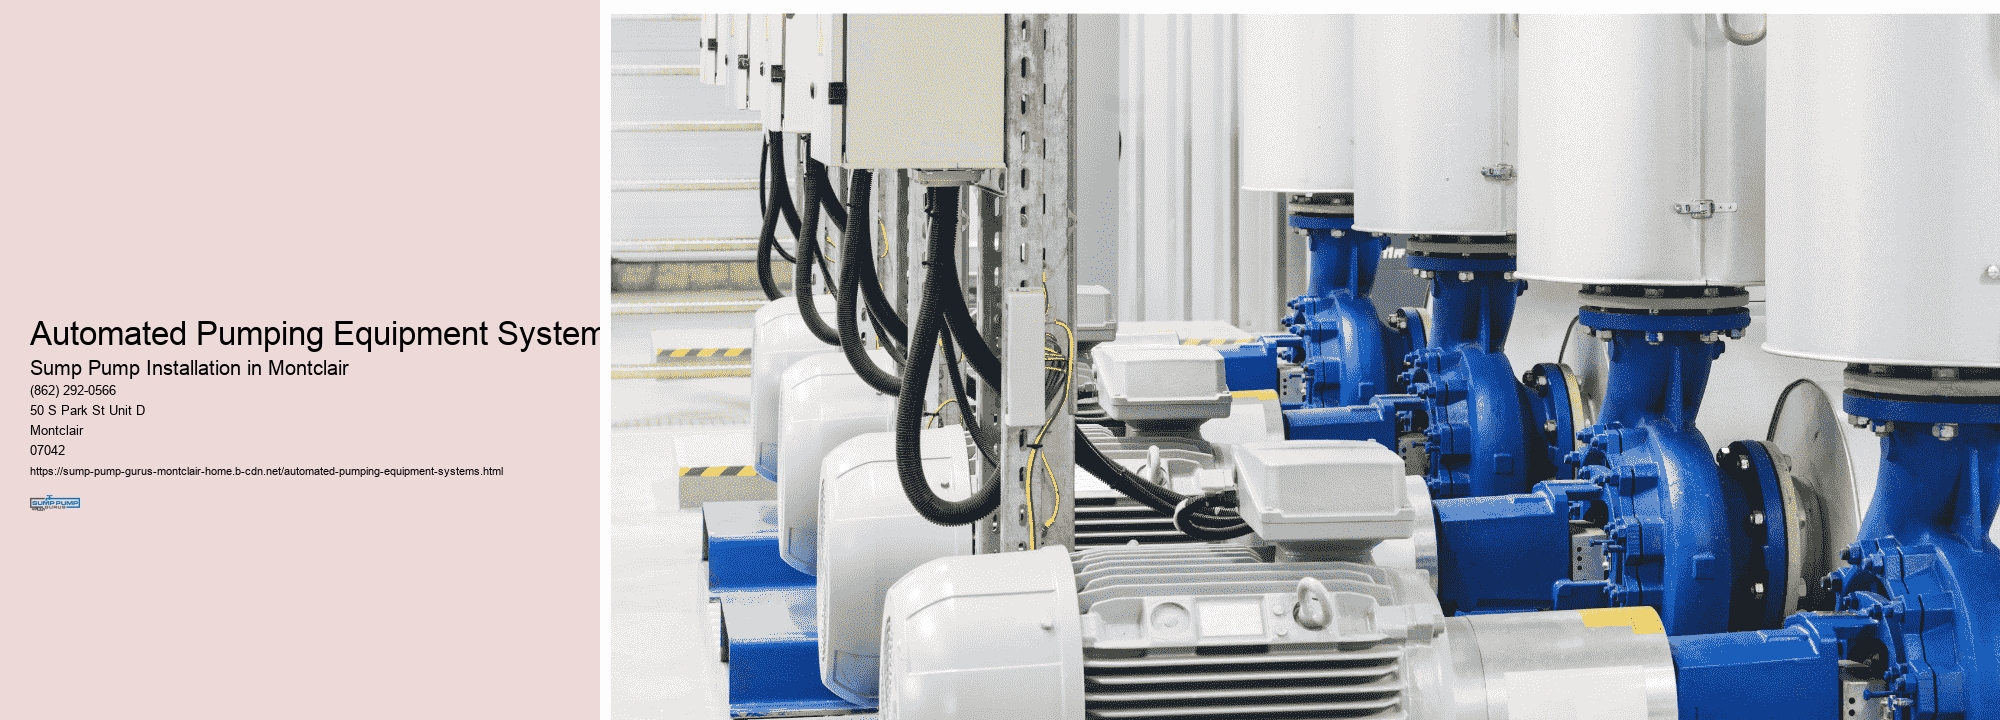 Automated Pumping Equipment Systems